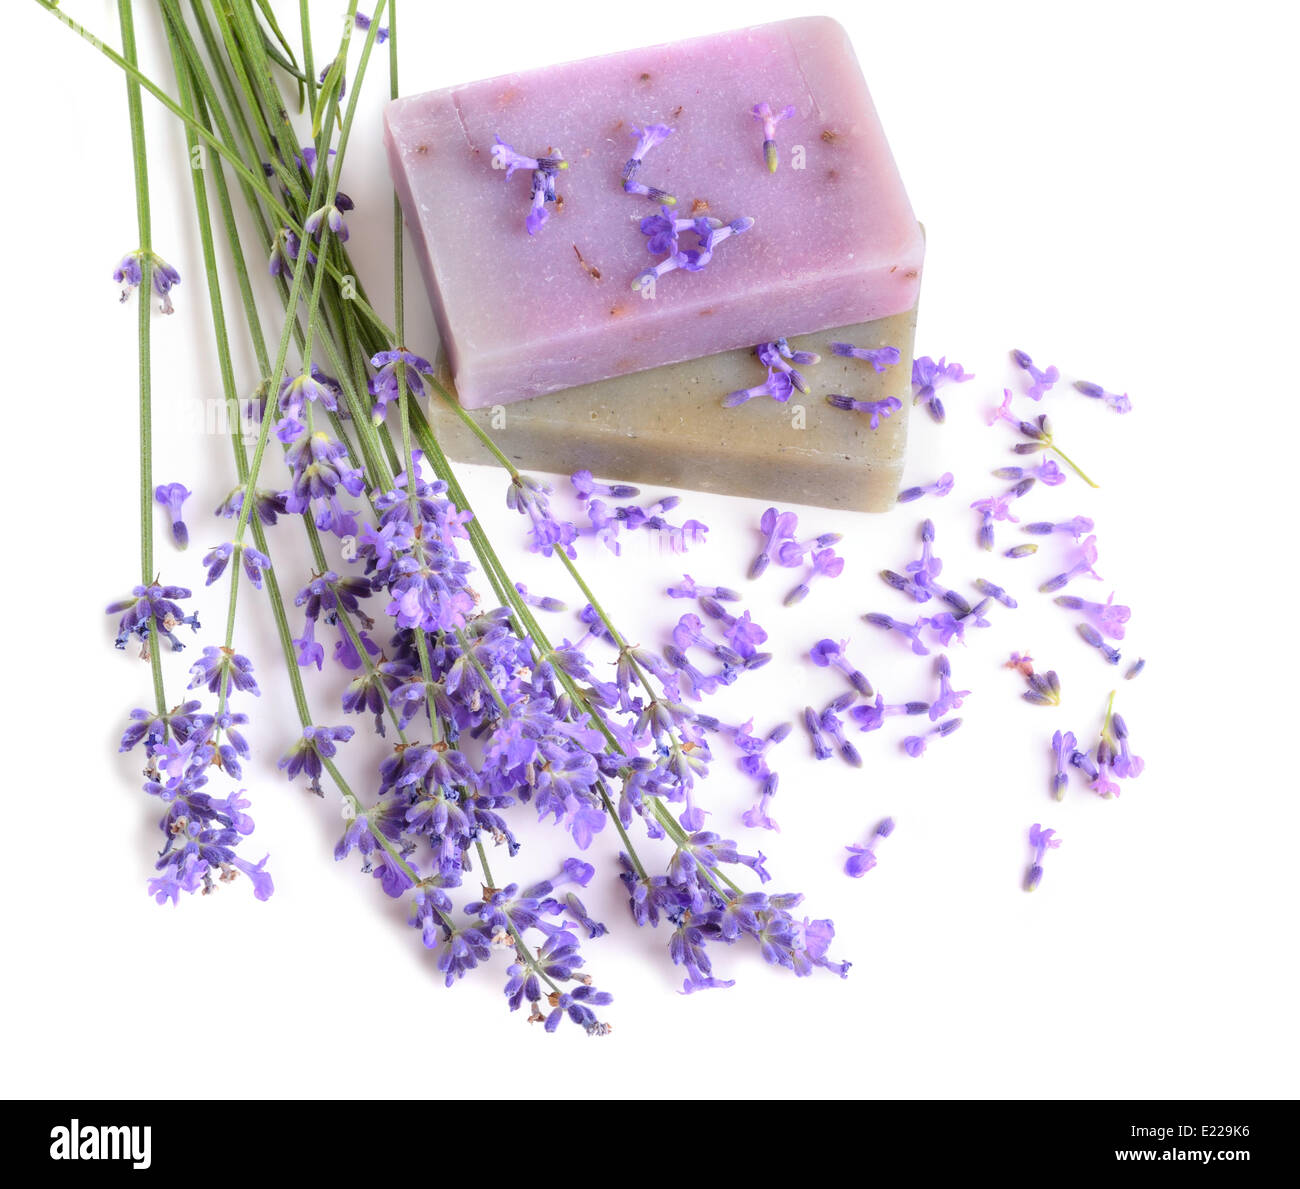 Natural soaps for bodycare Stock Photo